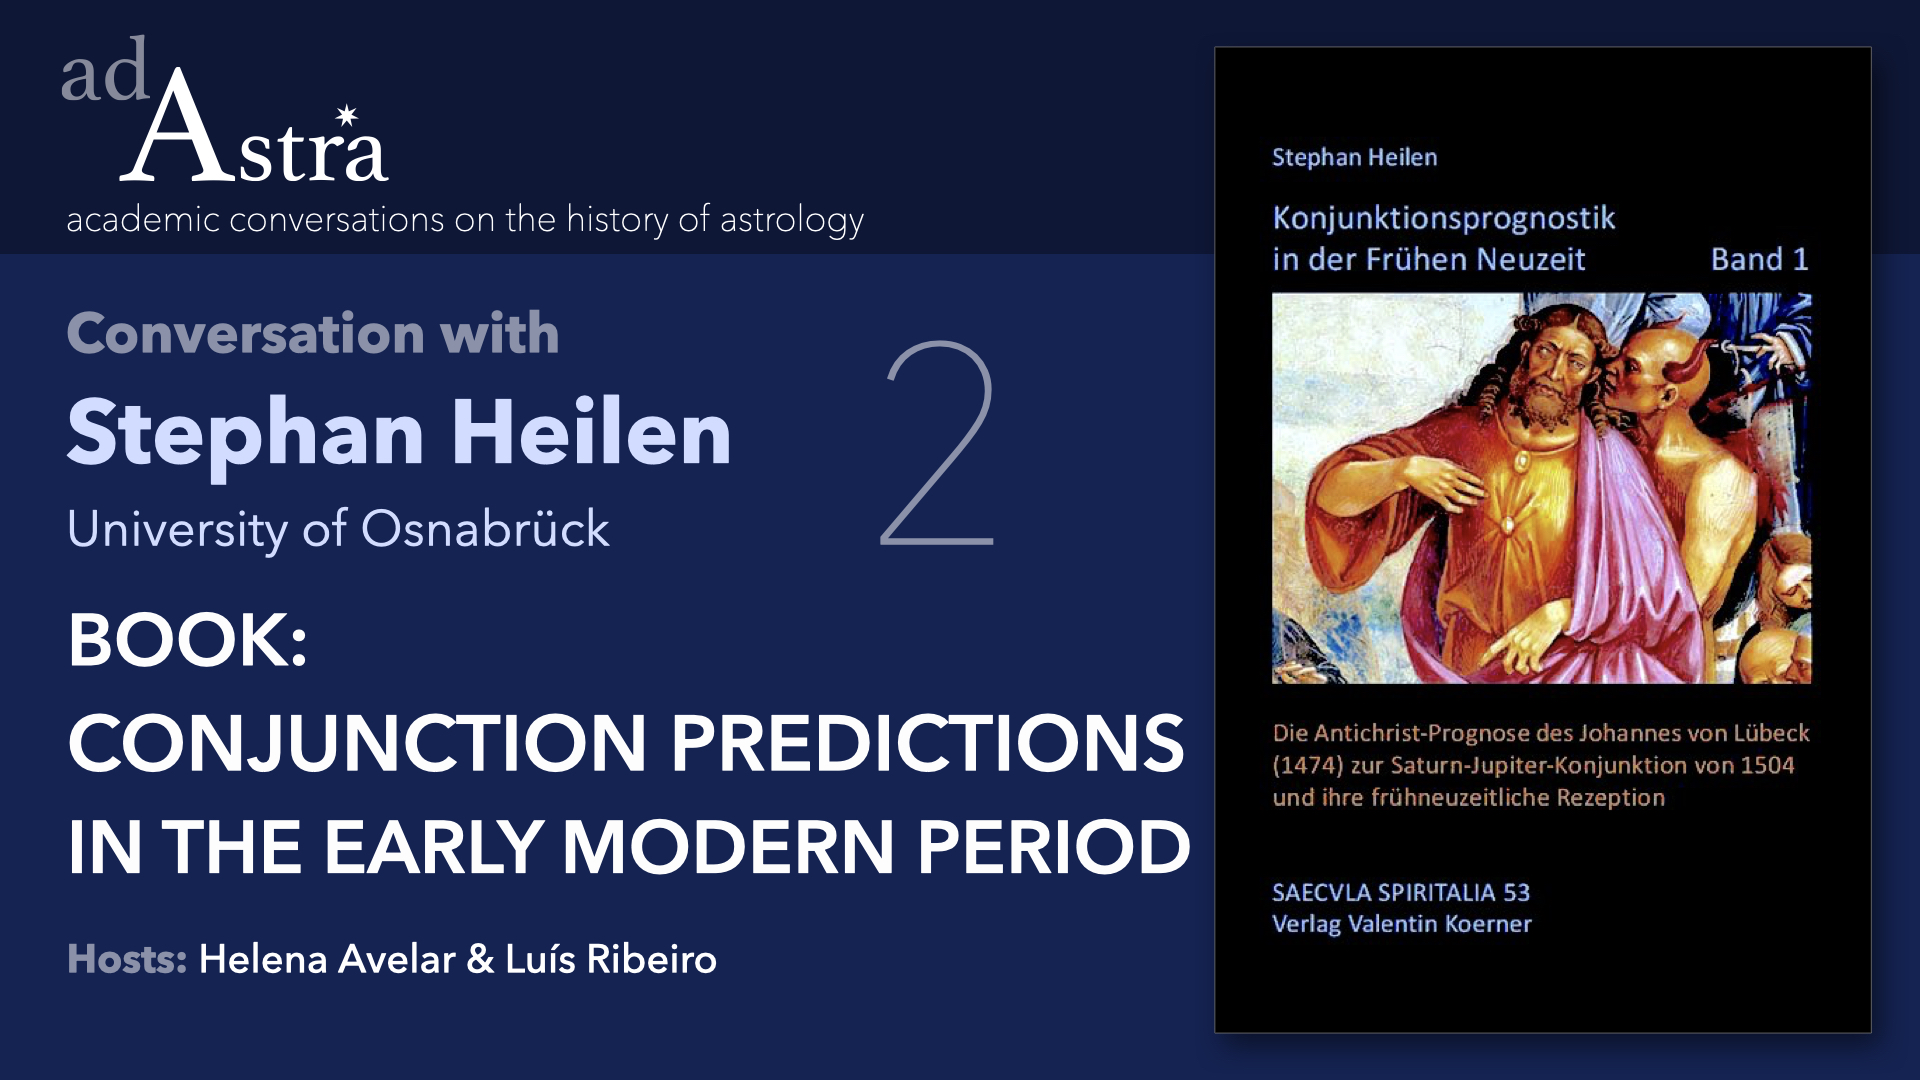 Book: Conjunction Predictions in the Early Modern Period by Stephan Heilen (Part 2)